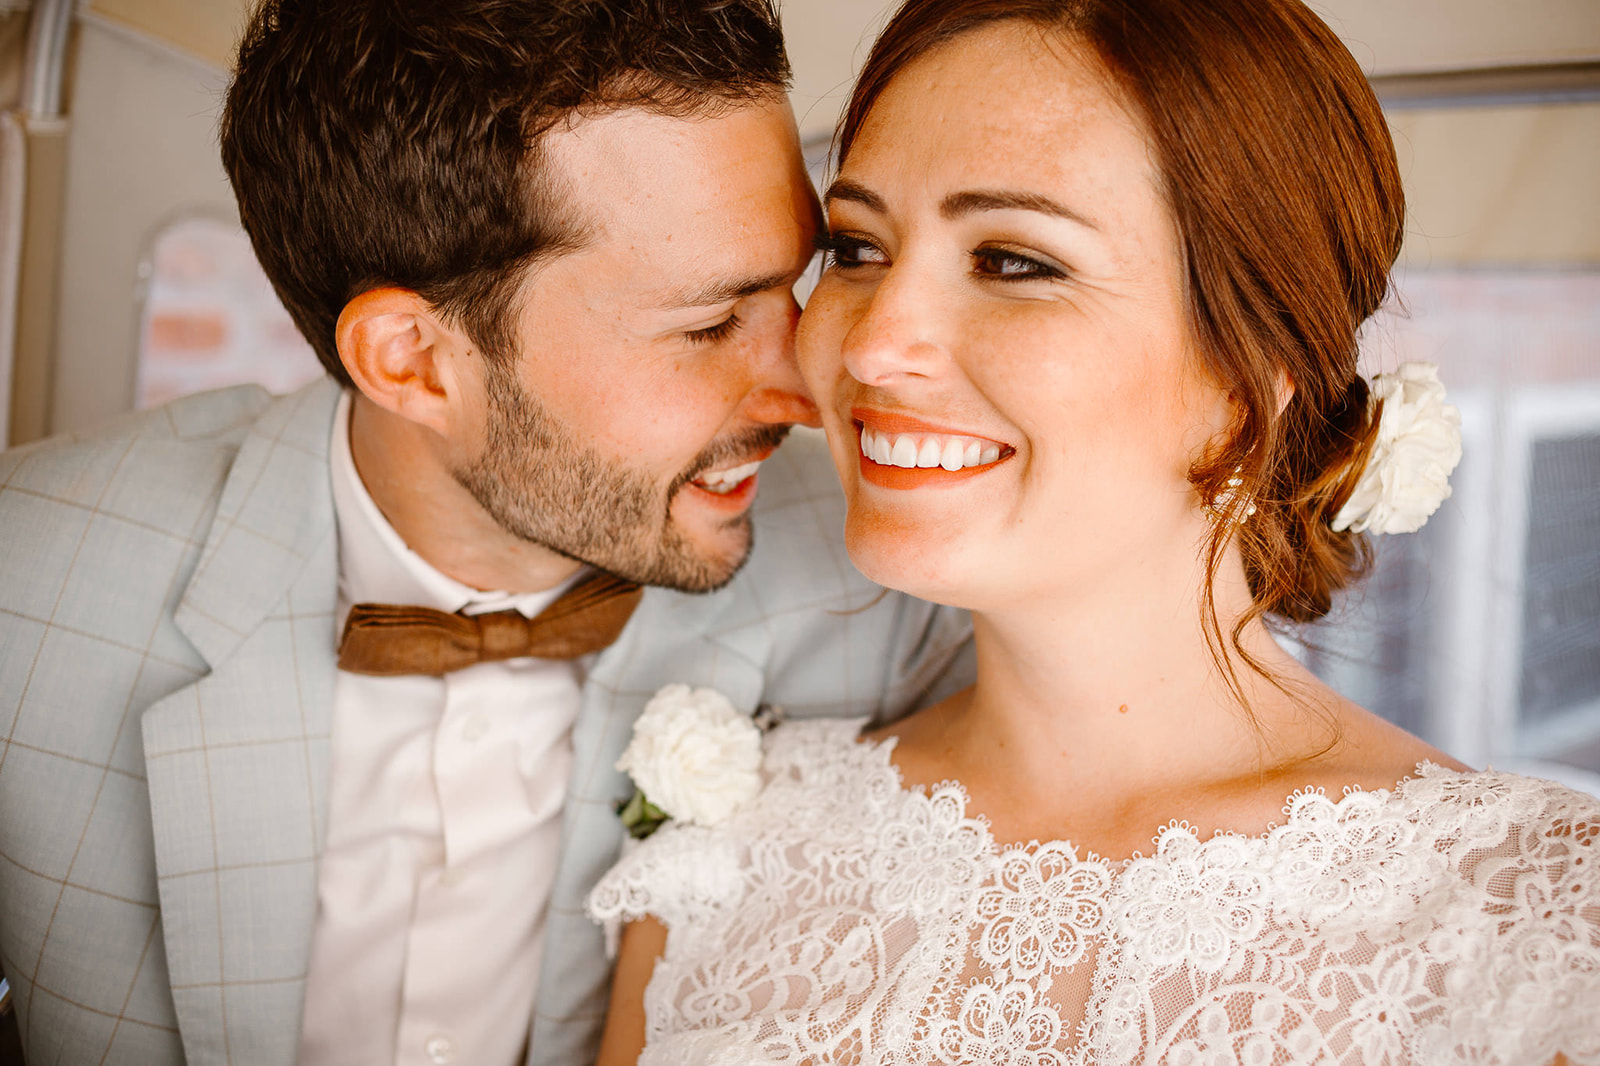 Bride smiling while the groom is cuddling her